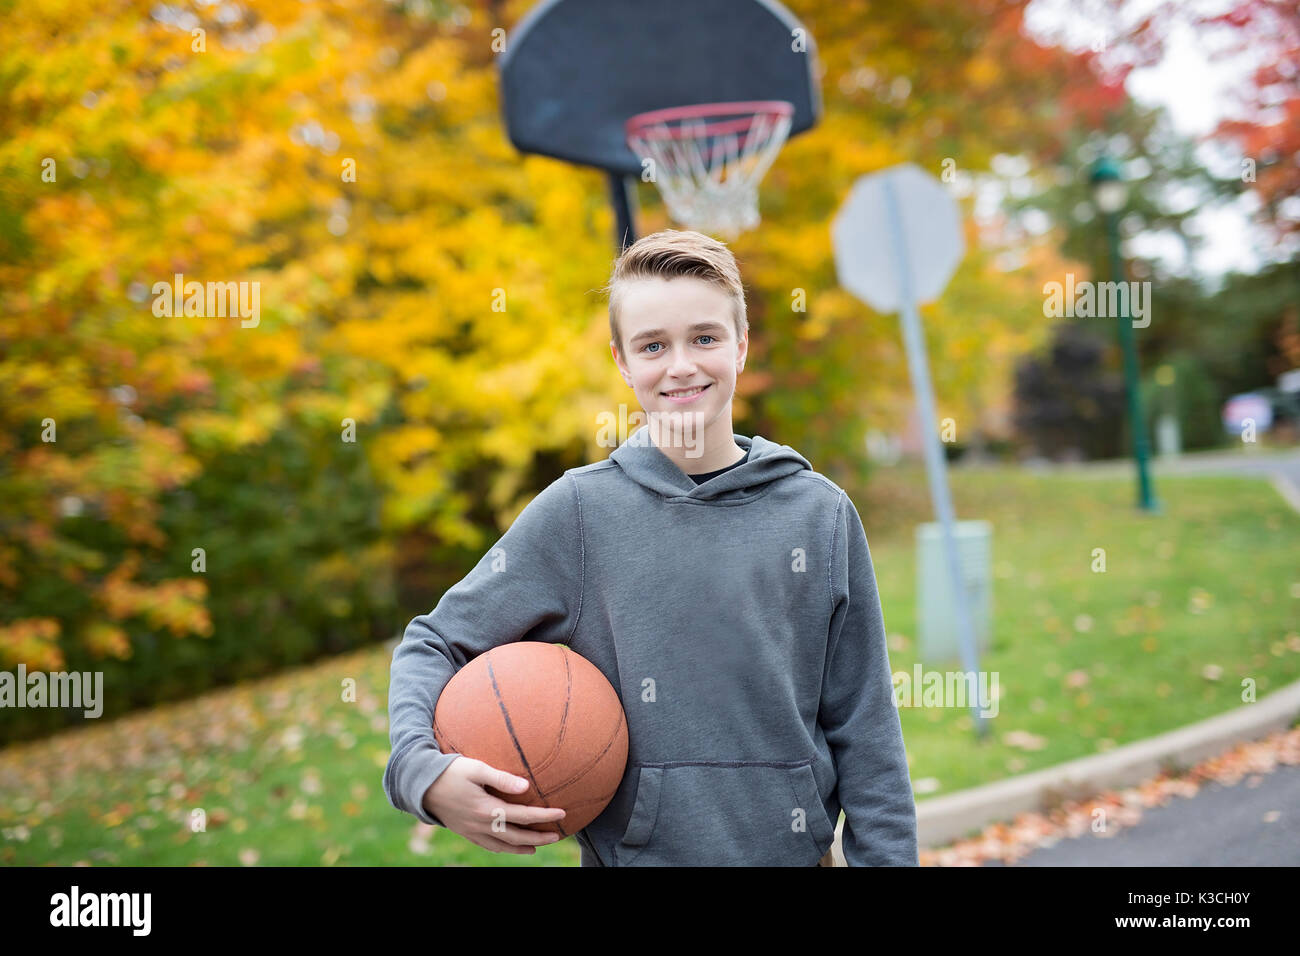 Boy alone during basketball game outside Stock Photo